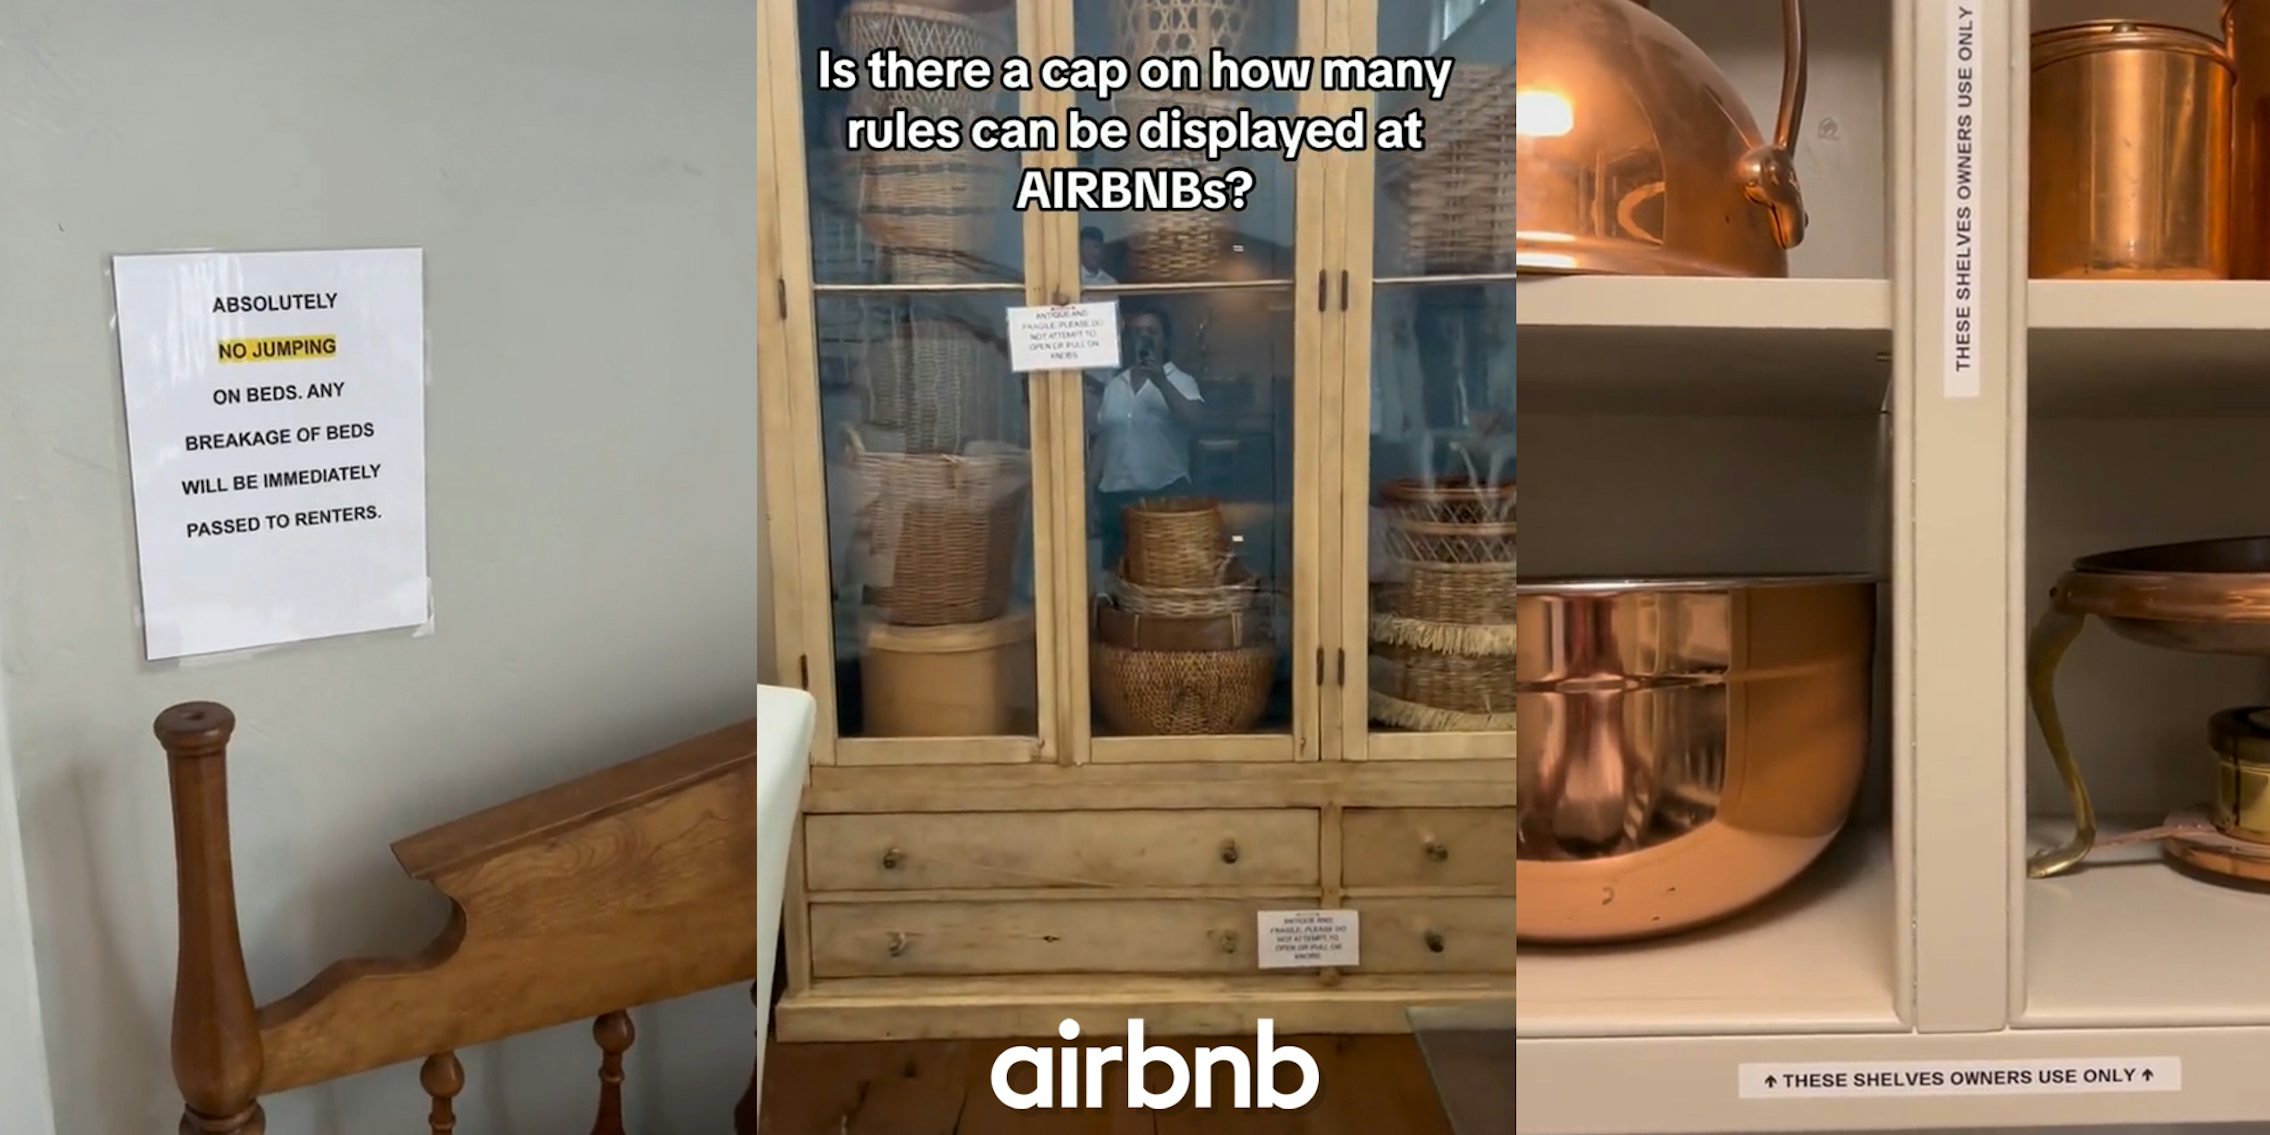 Airbnb interior with rules taped to wall next to bed (l) Airbnb cabinet with rules taped on the front with Airbnb logo at bottom with caption 'Is there a cap on how many rules can be displayed at AIRBNBs?' (c) Airbnb interior shelves with rules taped to edges (r)